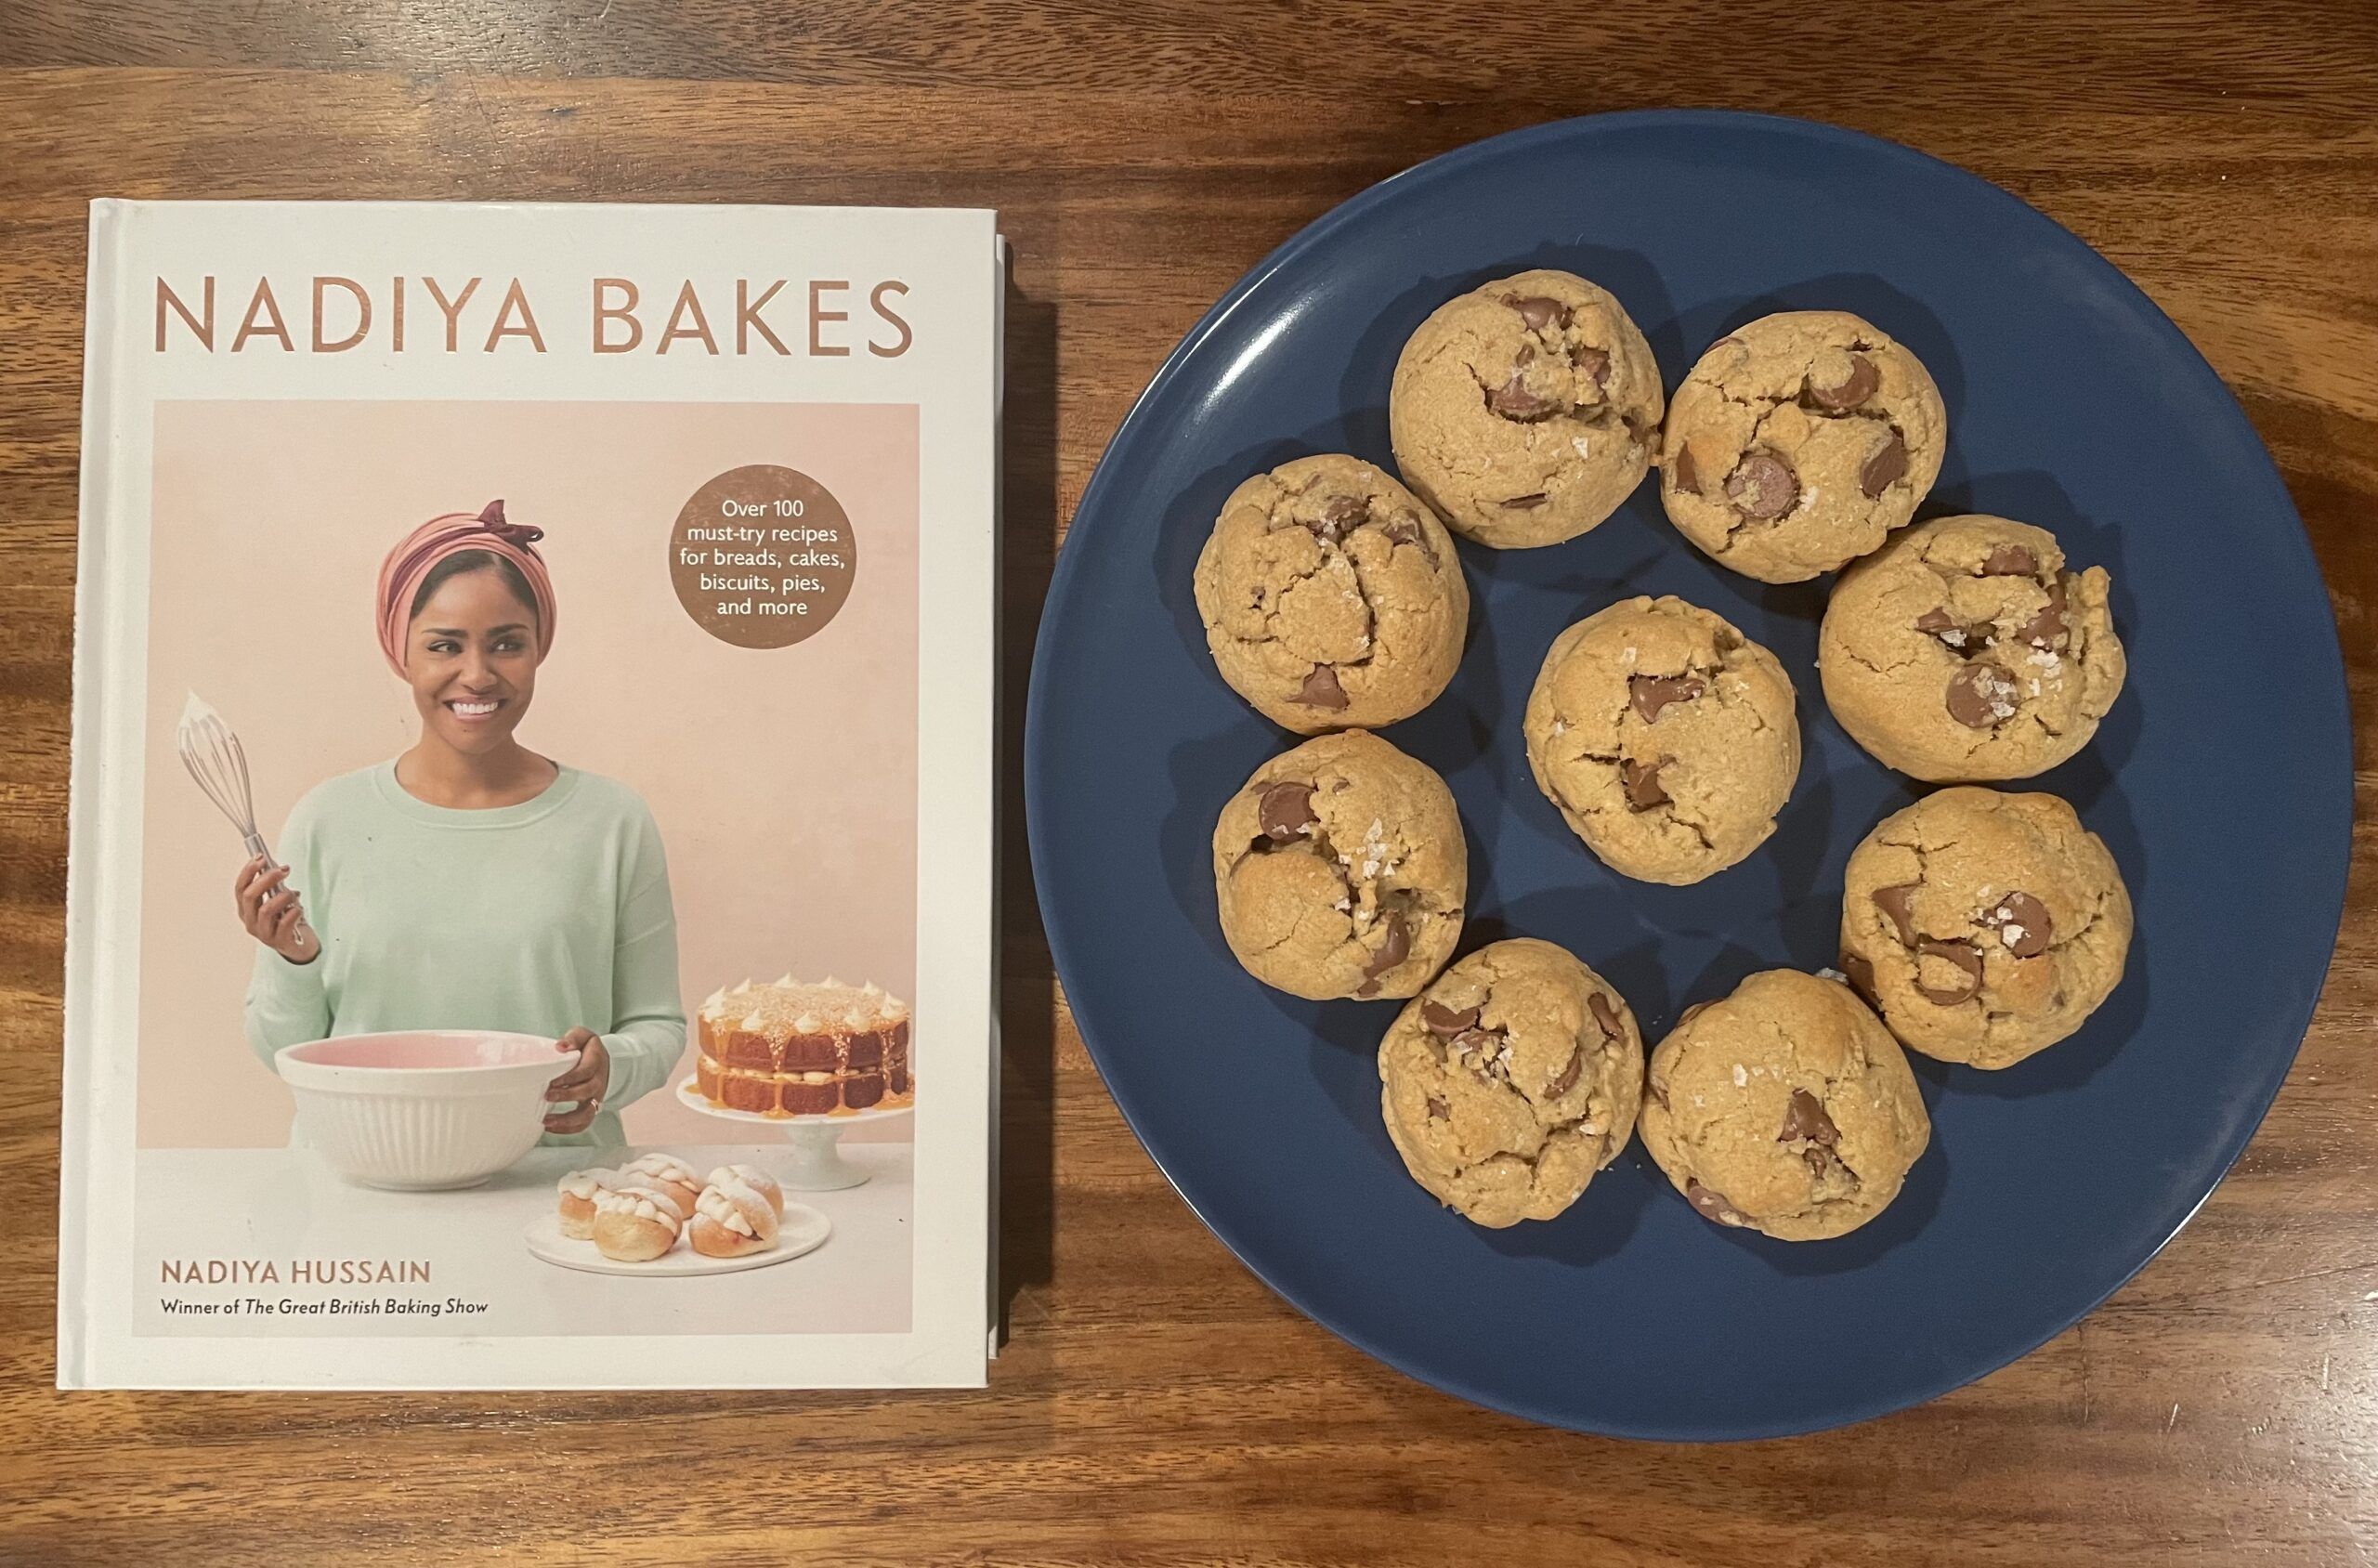 The cookbook Nadiya Bakes is on a wooden table next to a blue plate of small, rounded chocolate chip cookies.